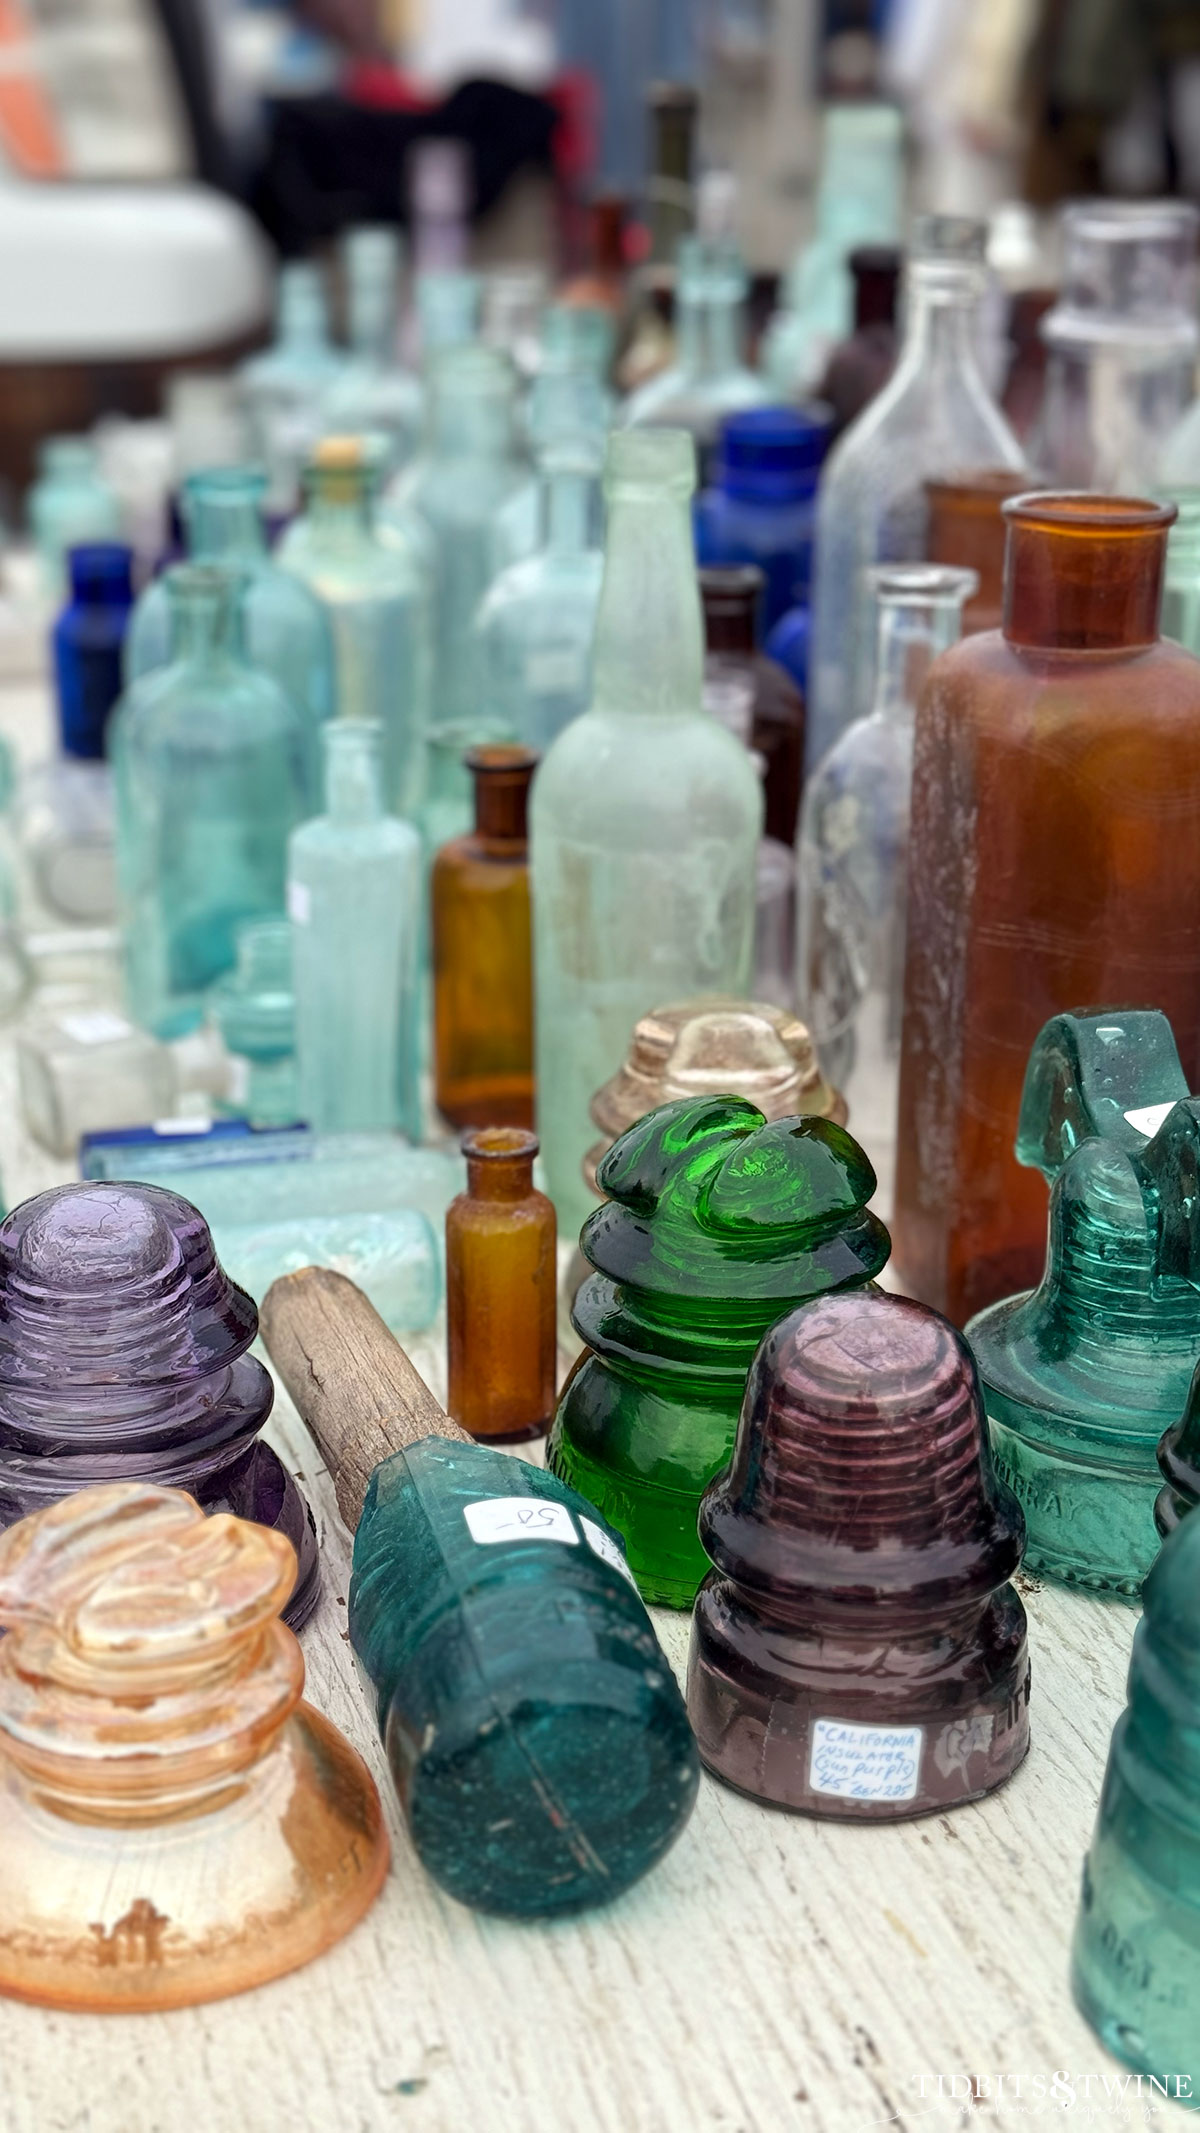 table display of antique bottles including green glass, blue and brown